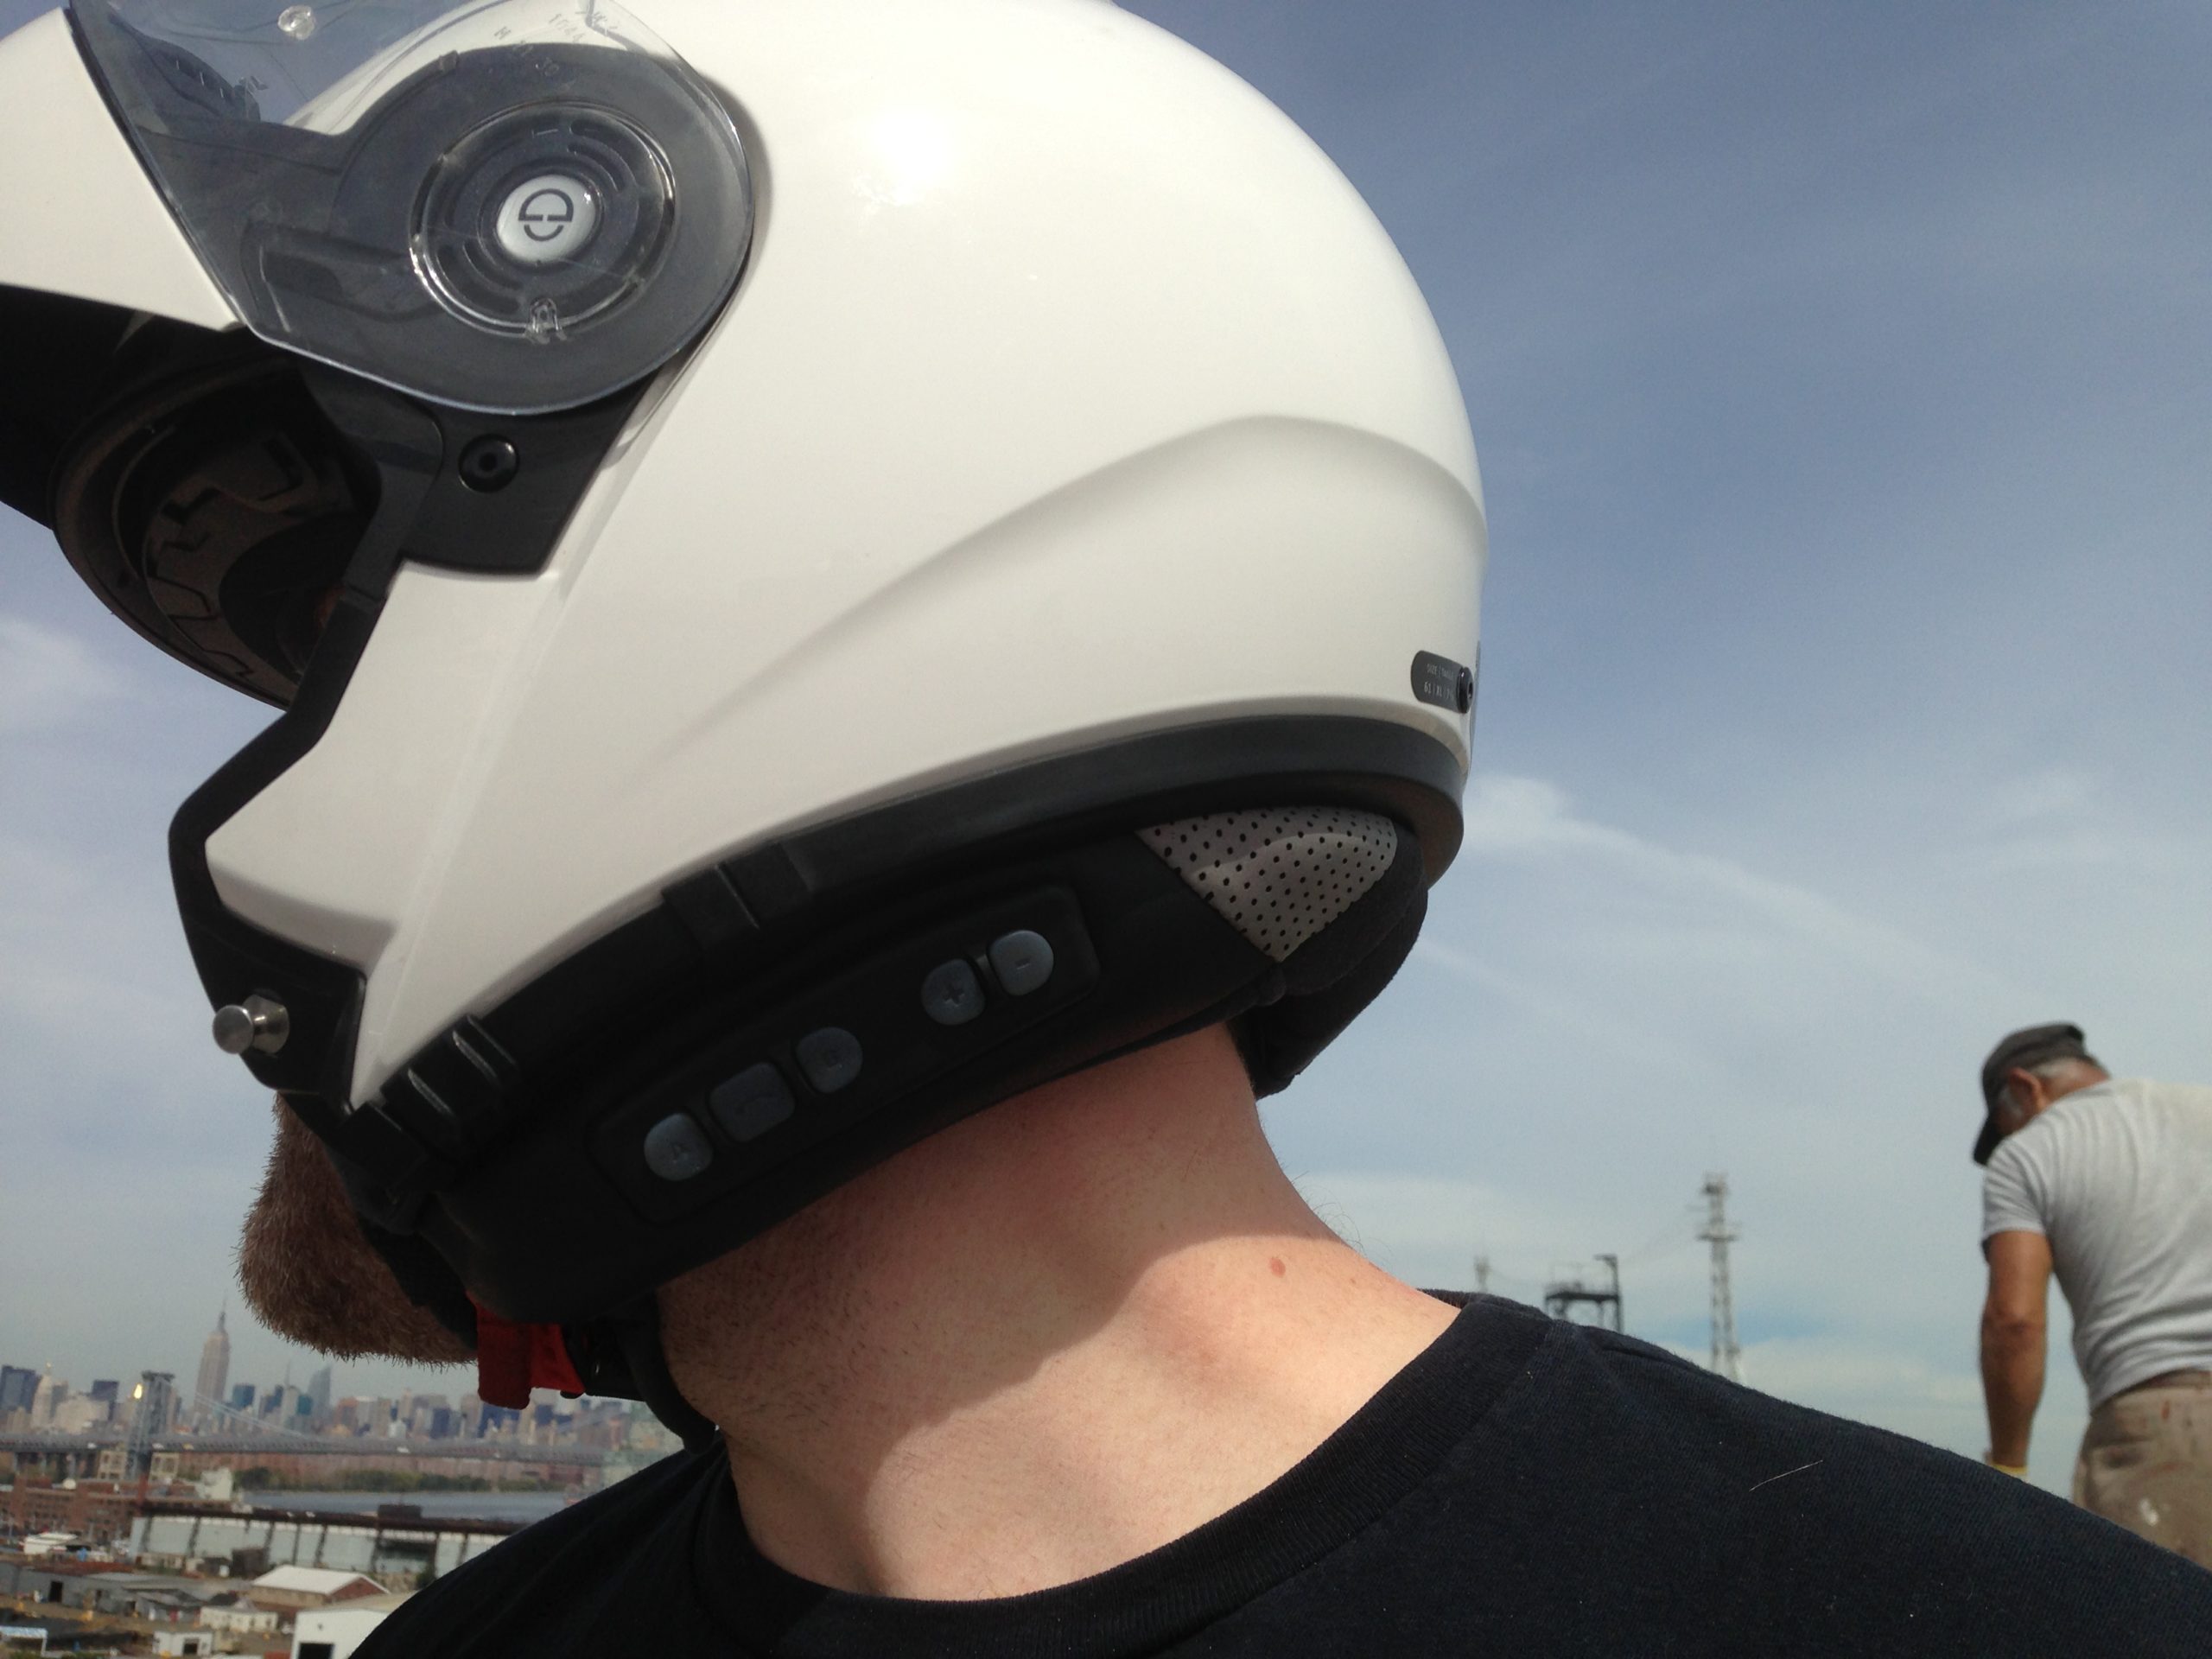 What’s Better? A $1200 Motorcycle Helmet Or Cheap Earbuds?